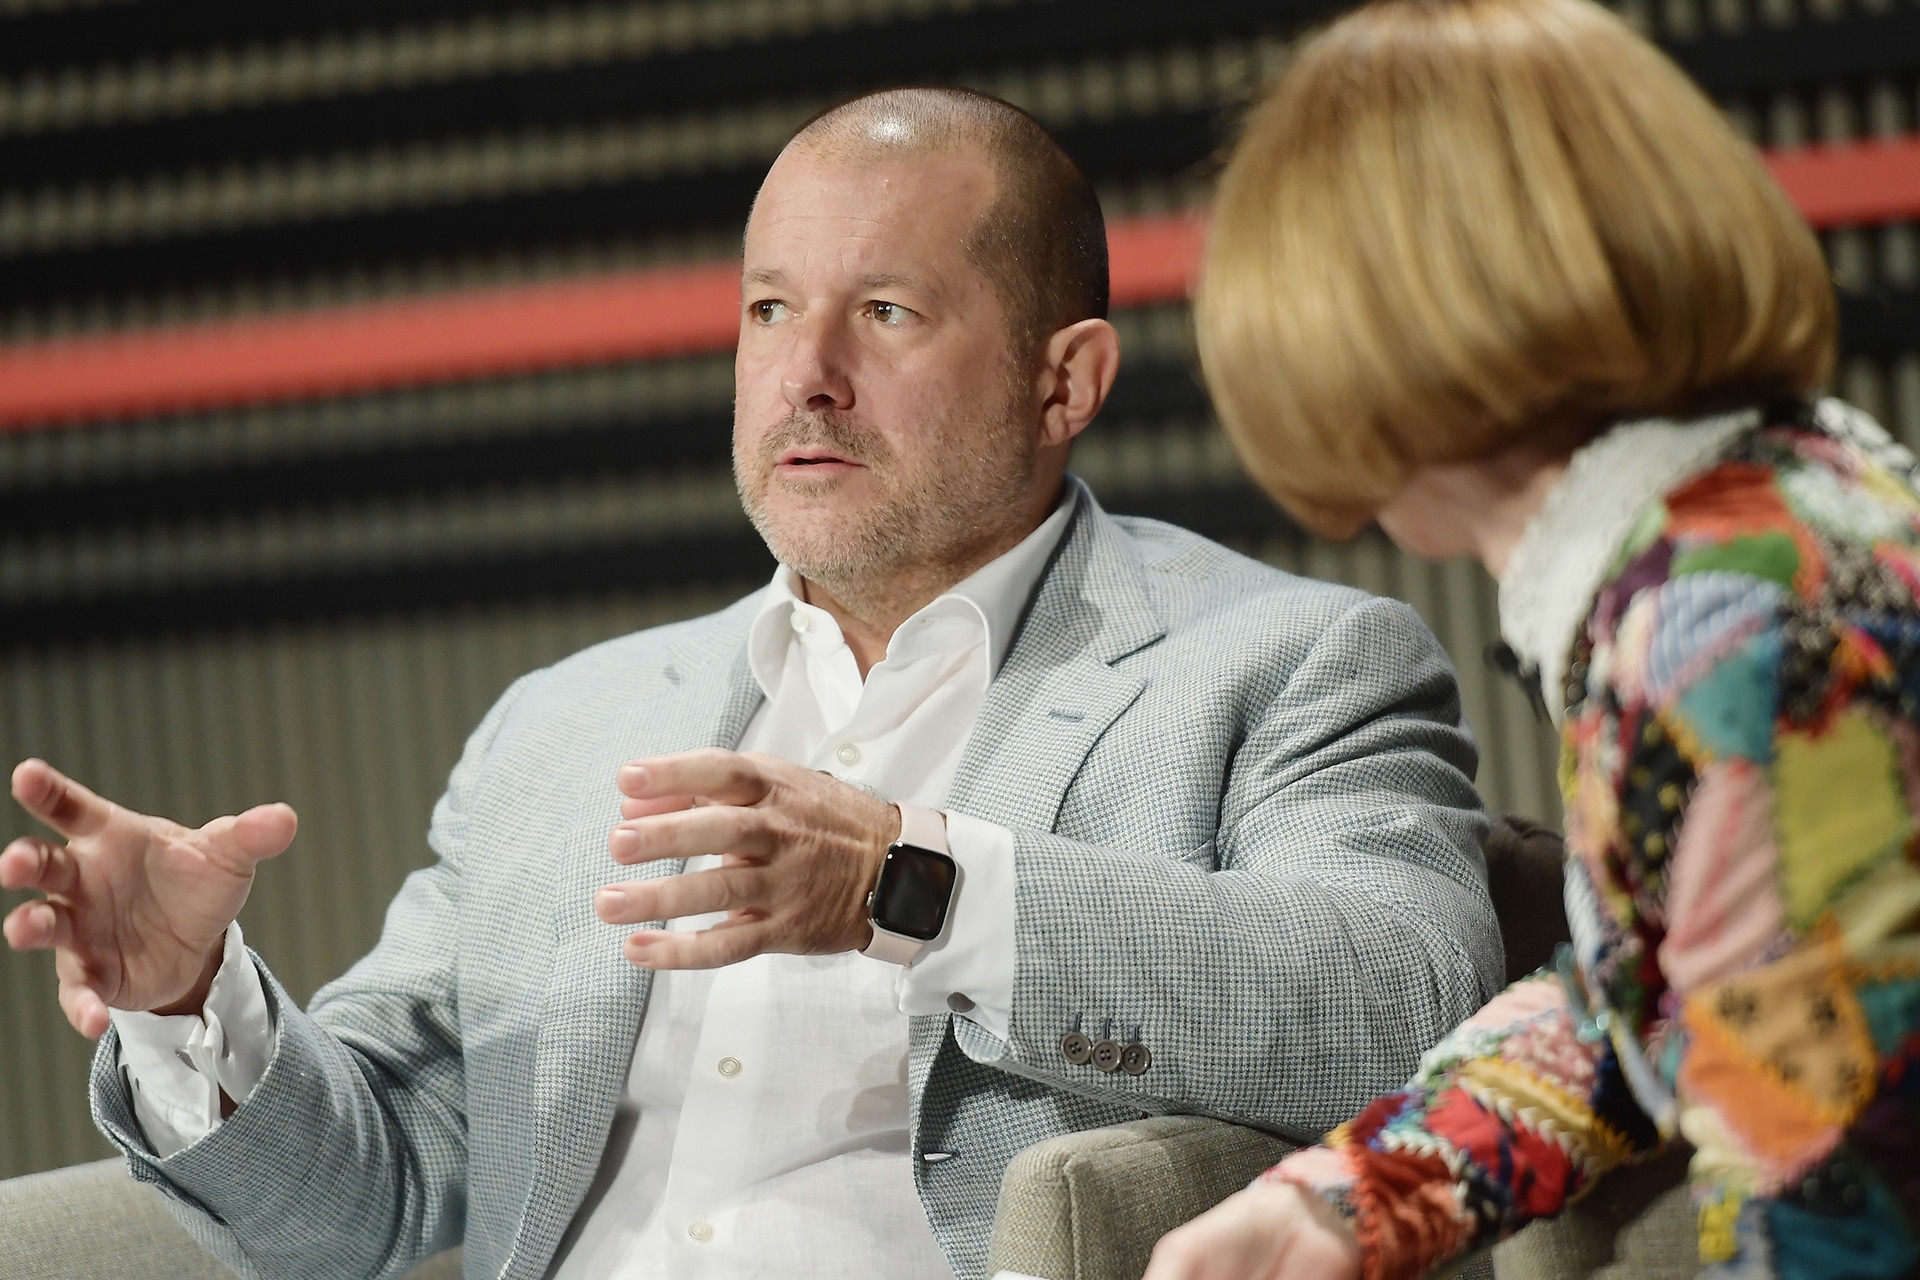 5 things to know about Marc Newson, Jony Ive's longtime design partner